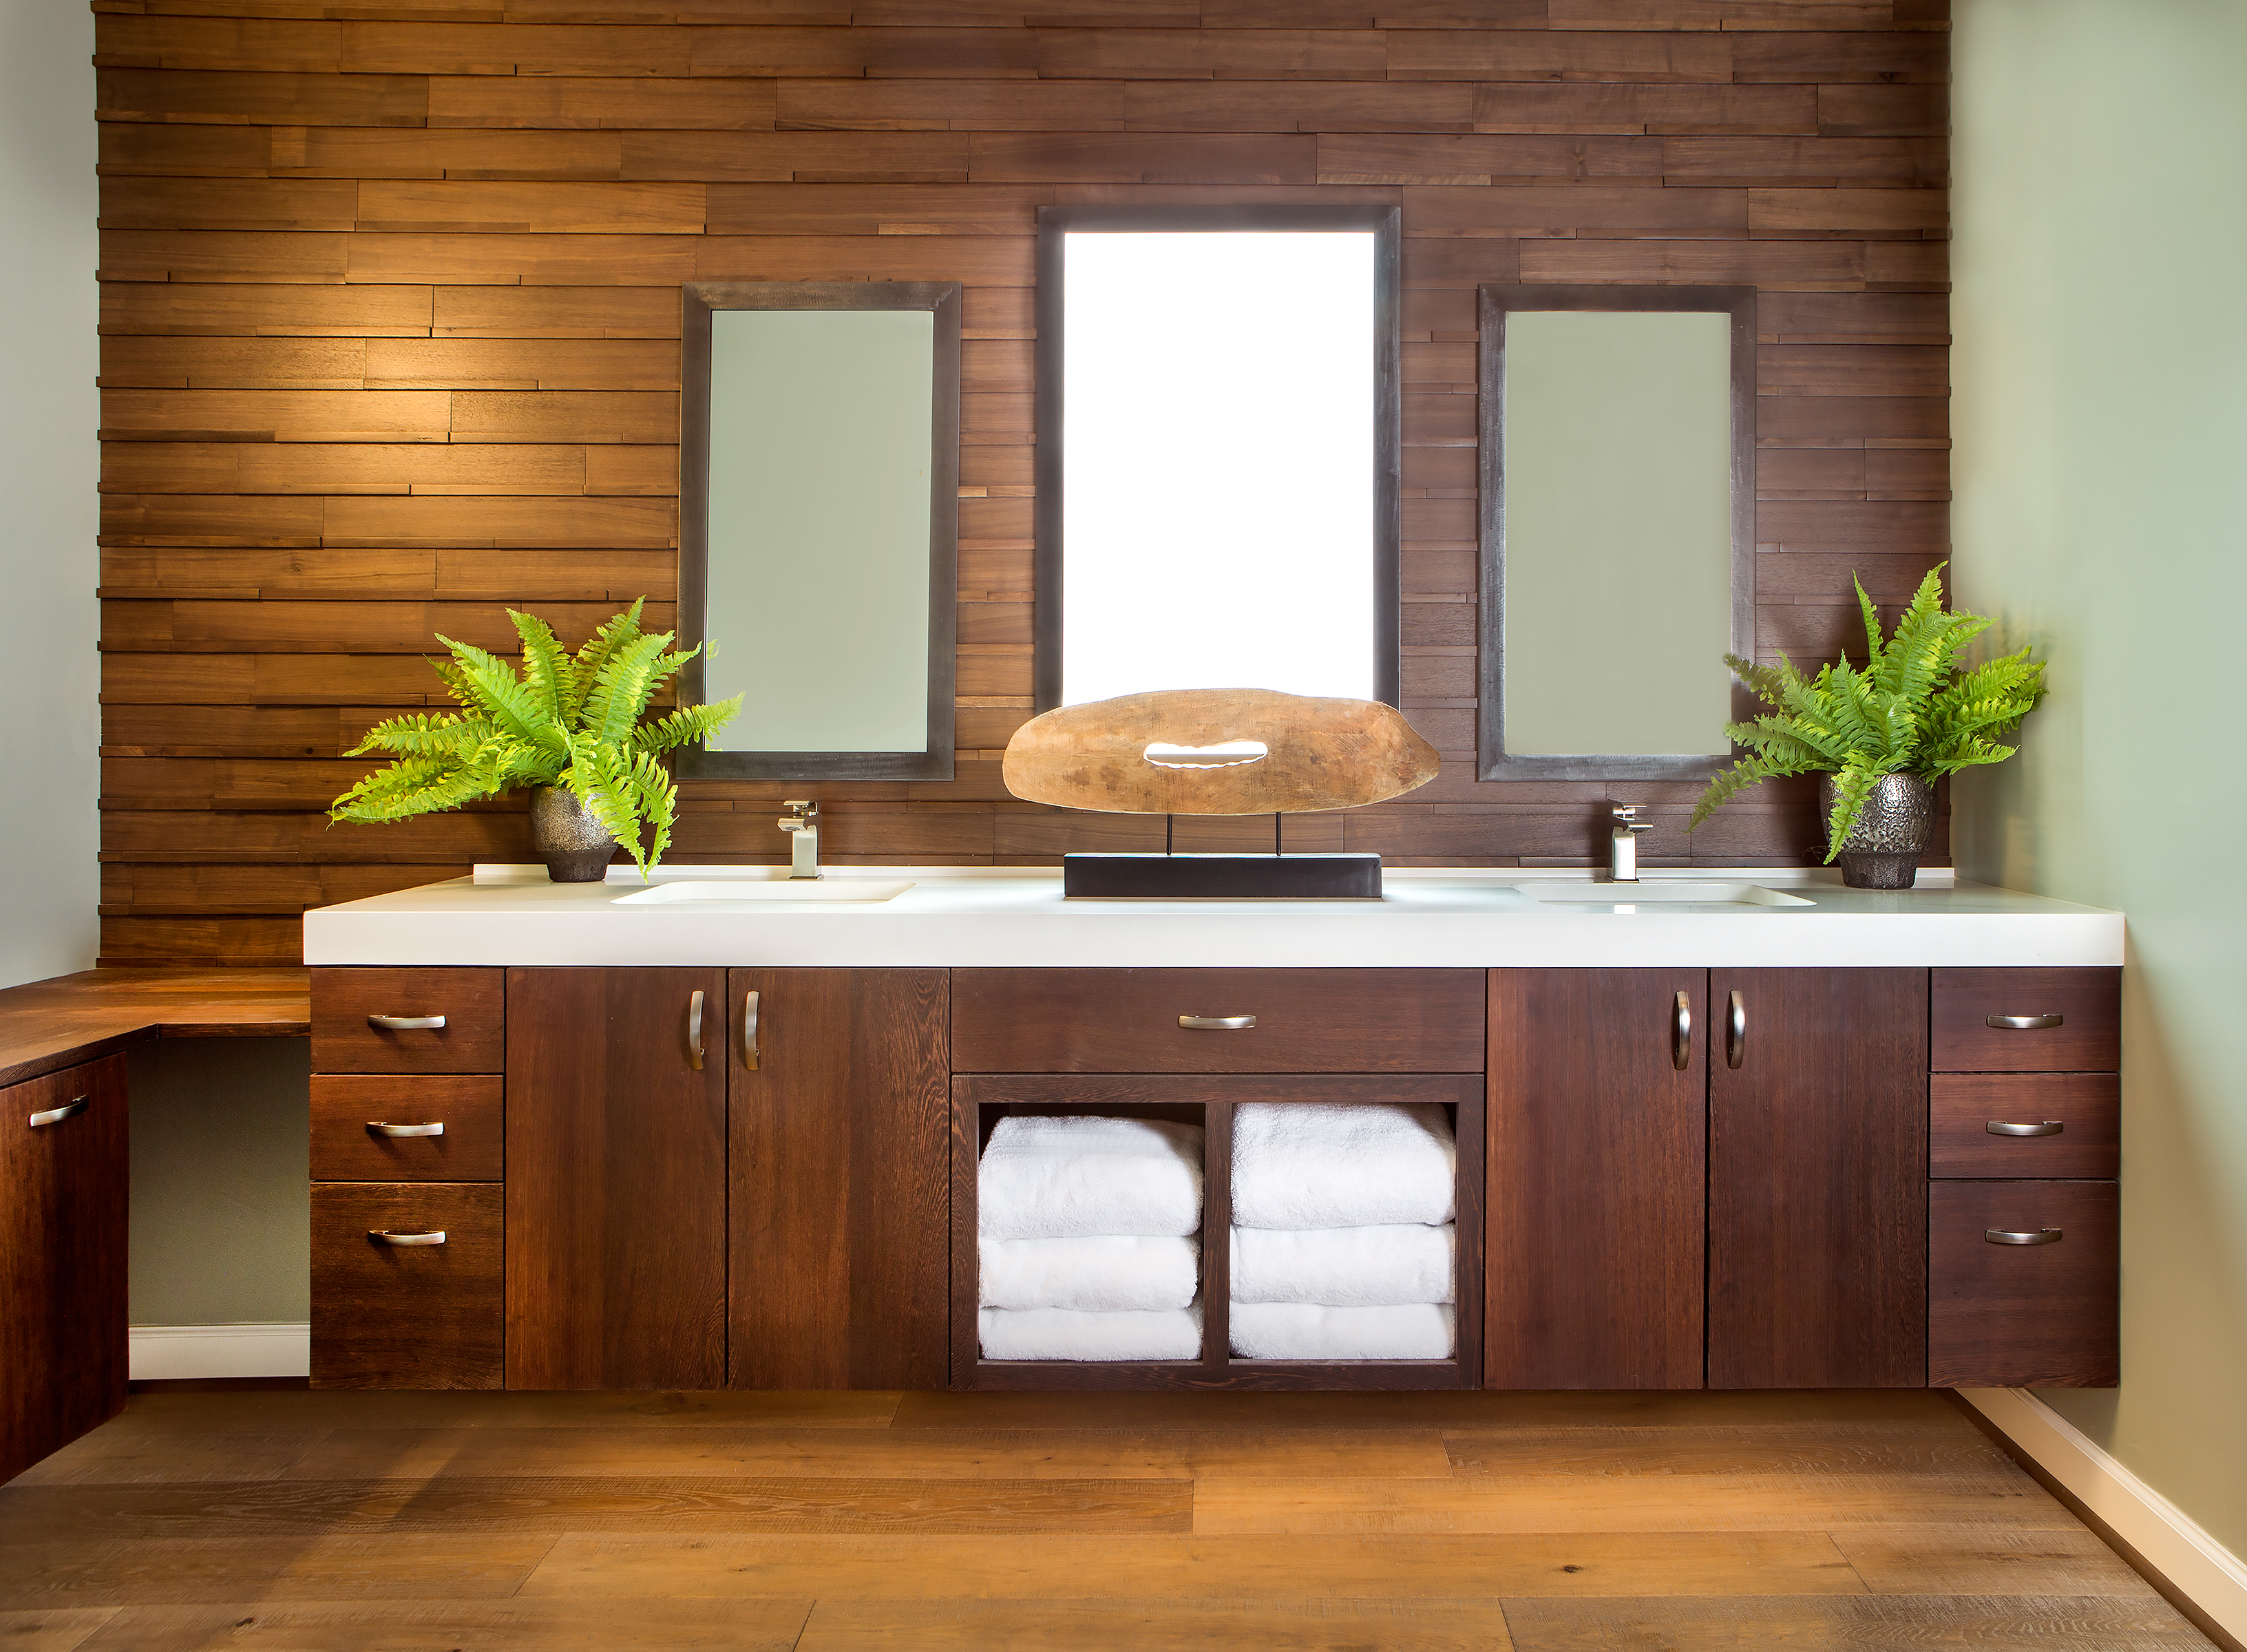 The master bath floating vanity was a collaboration of homeowner Paul Manning, designer Mandy Summers-Smith, and custom furniture designer Steven Fear. Constructed of natural wenge wood, which is resilient to stains, the overall feeling is elegant and masculine. The vanity mirrors are held in place by strong magnetic strips.